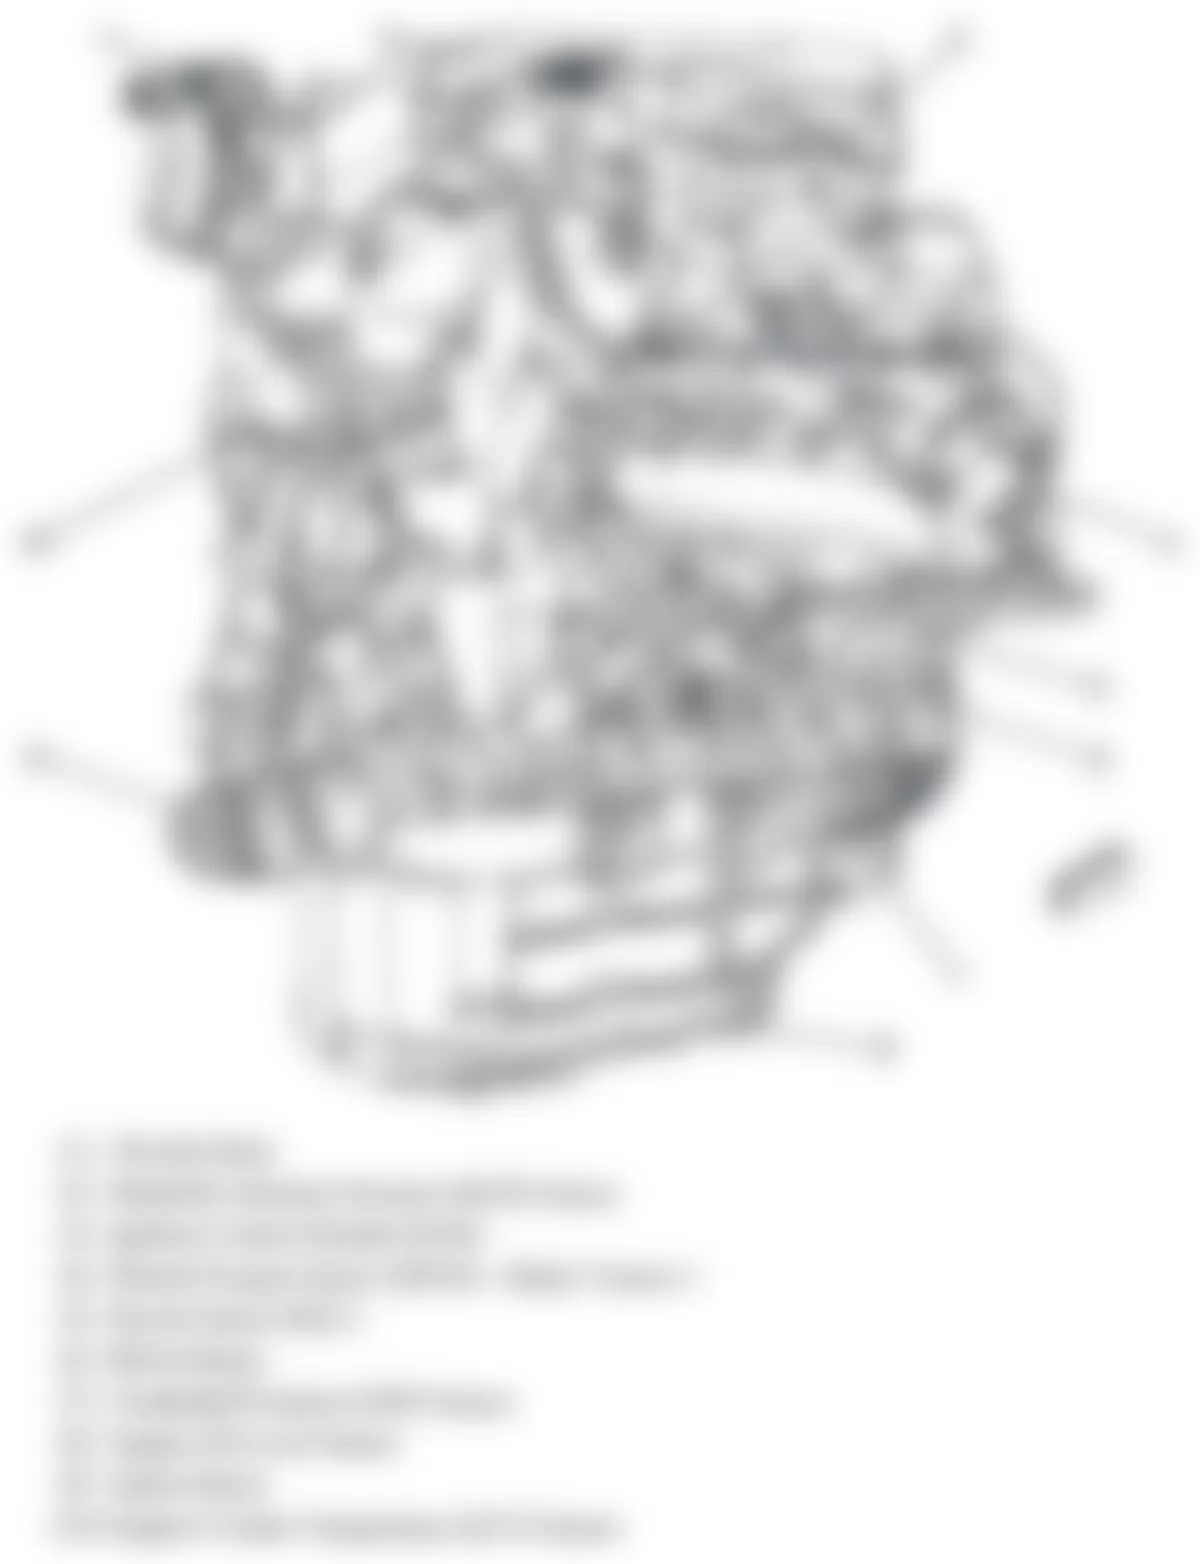 Buick Lucerne CXL 2010 - Component Locations -  Right Side Of Engine (3.9L)